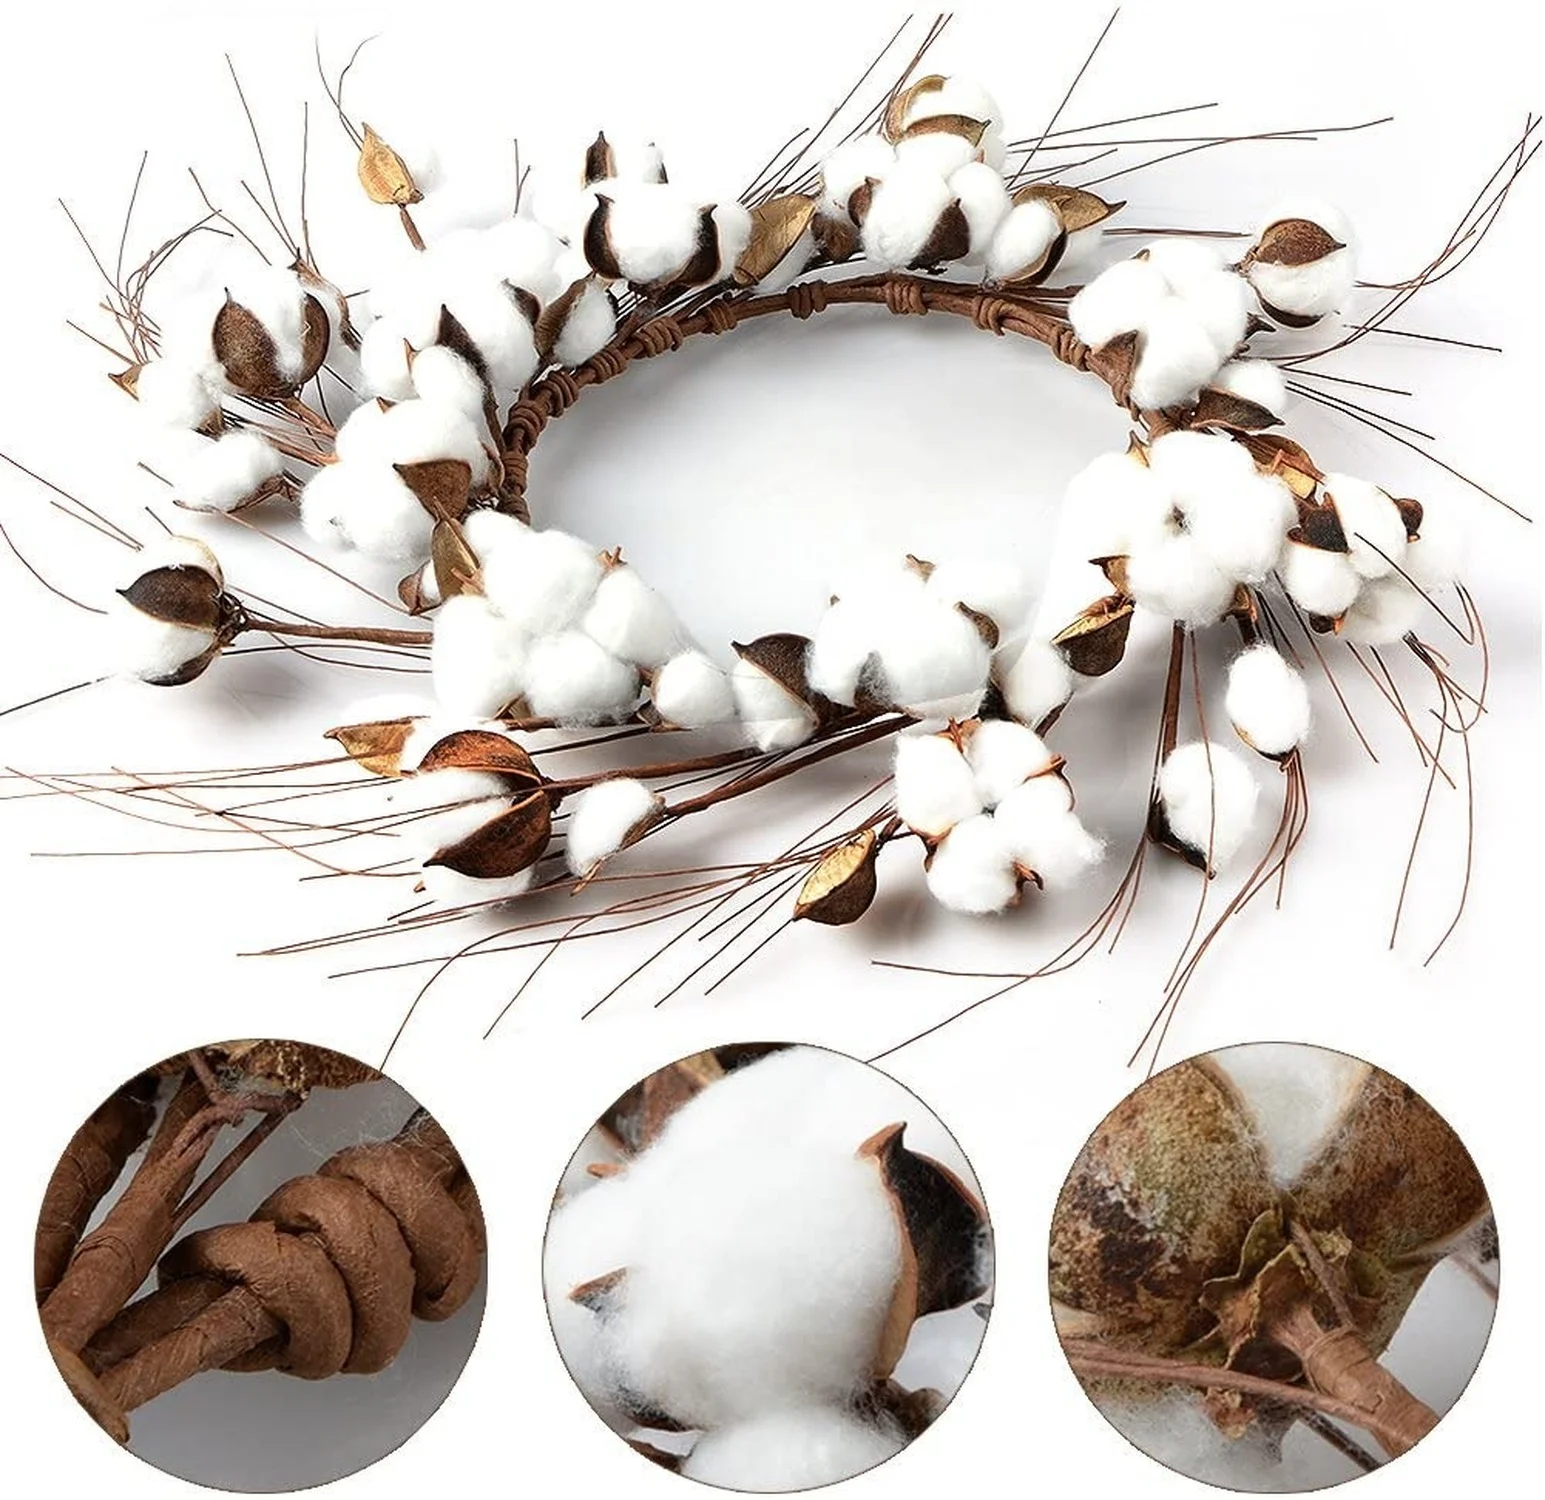 

Wreath Dried Flowers Cotton Boll Wreath Stem Branches Decorative Flower for Farmhouse Style Wedding Home Decorations Flower